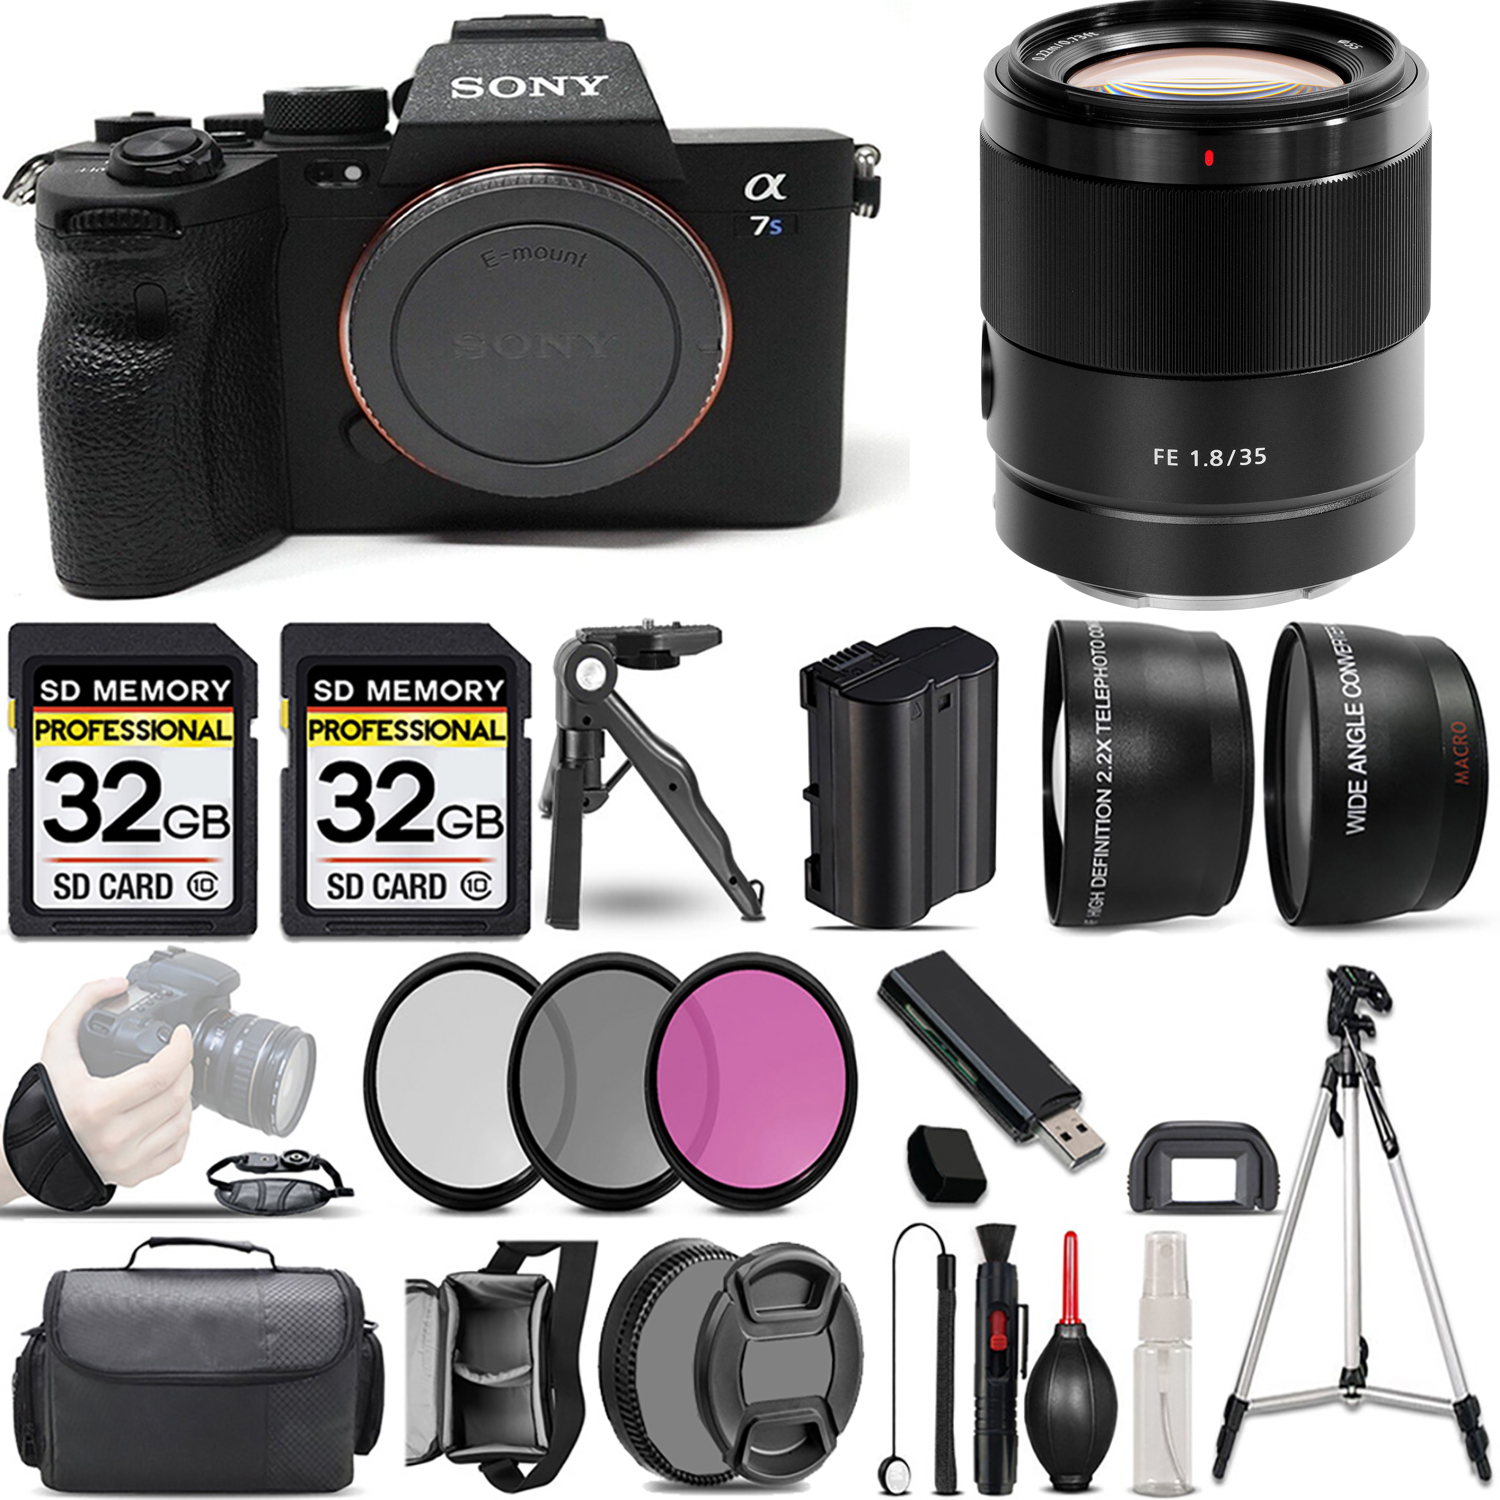 a7S III Mirrorless Camera + 35mm Lens + 3 Piece Filter Set + 64GB + Bag & More! *FREE SHIPPING*